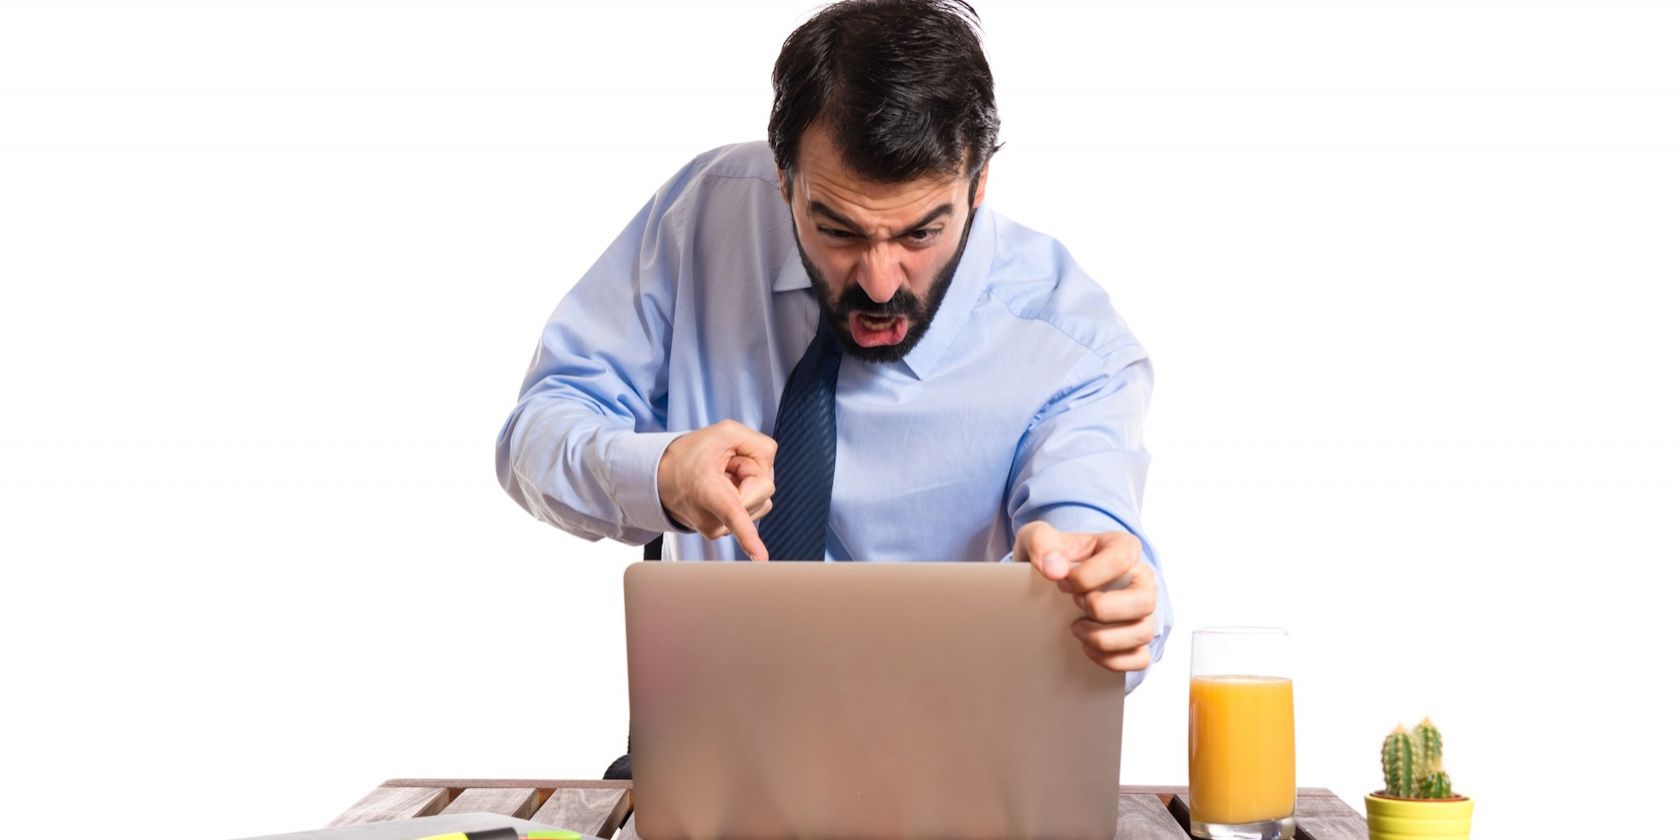 Man frustrated and pointing at his laptop